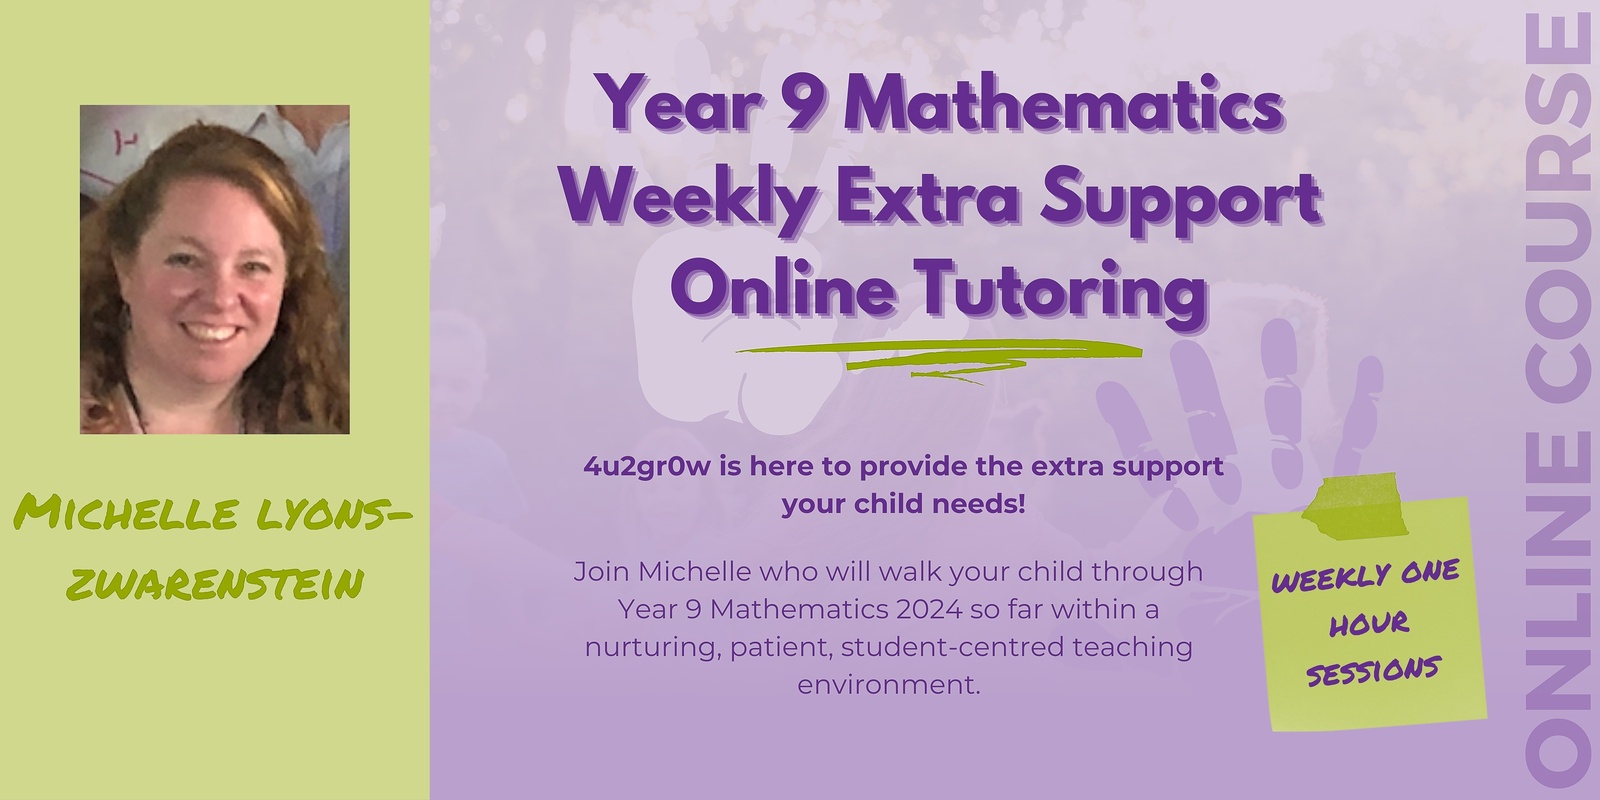 Banner image for Year 9 Mathematics Weekly Extra Support Online Tutoring